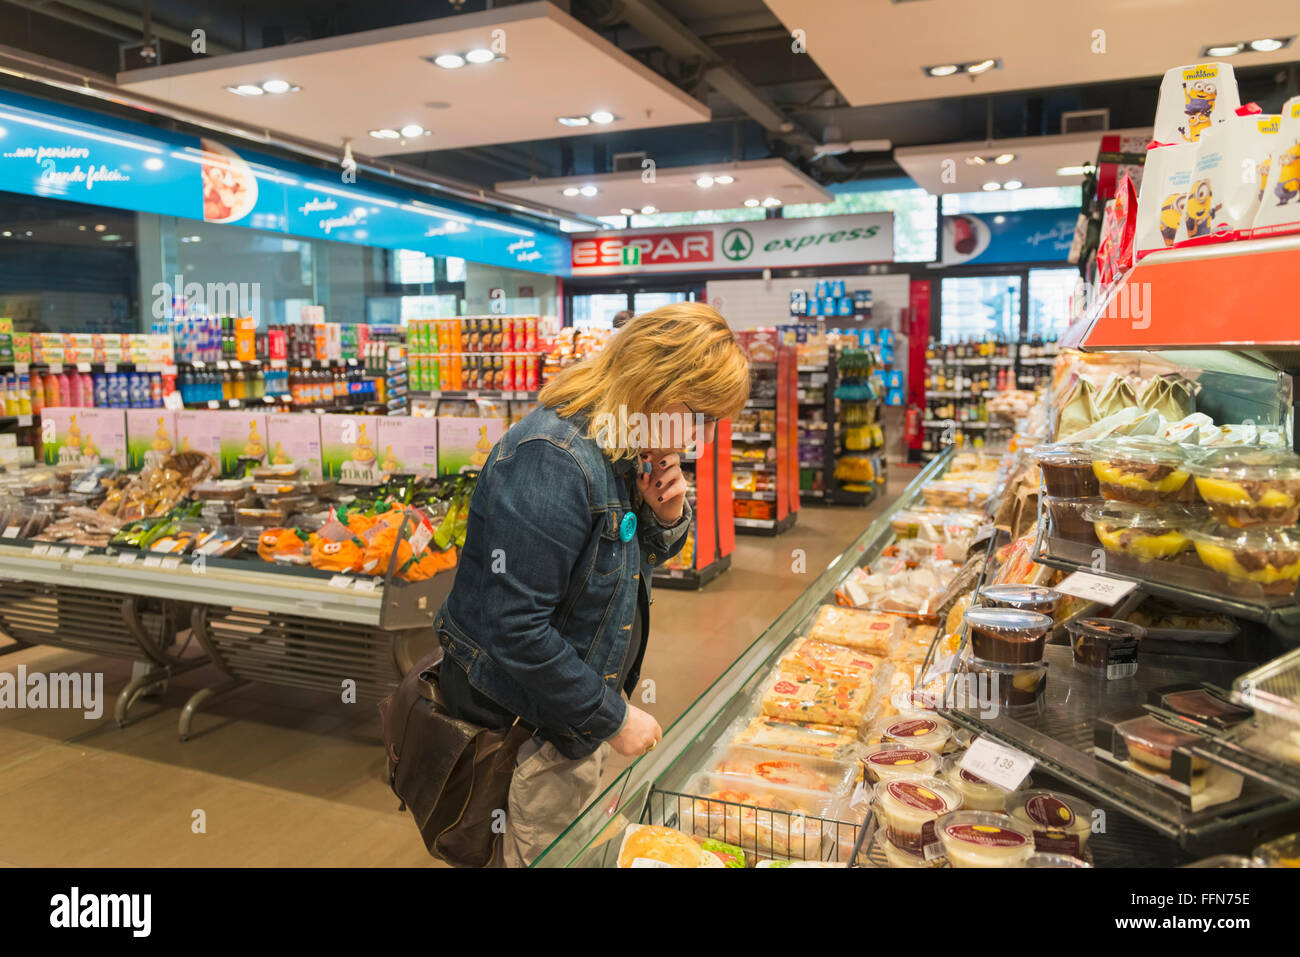 Shopping in a Spar convenience store in Italy, Europe Stock Photo